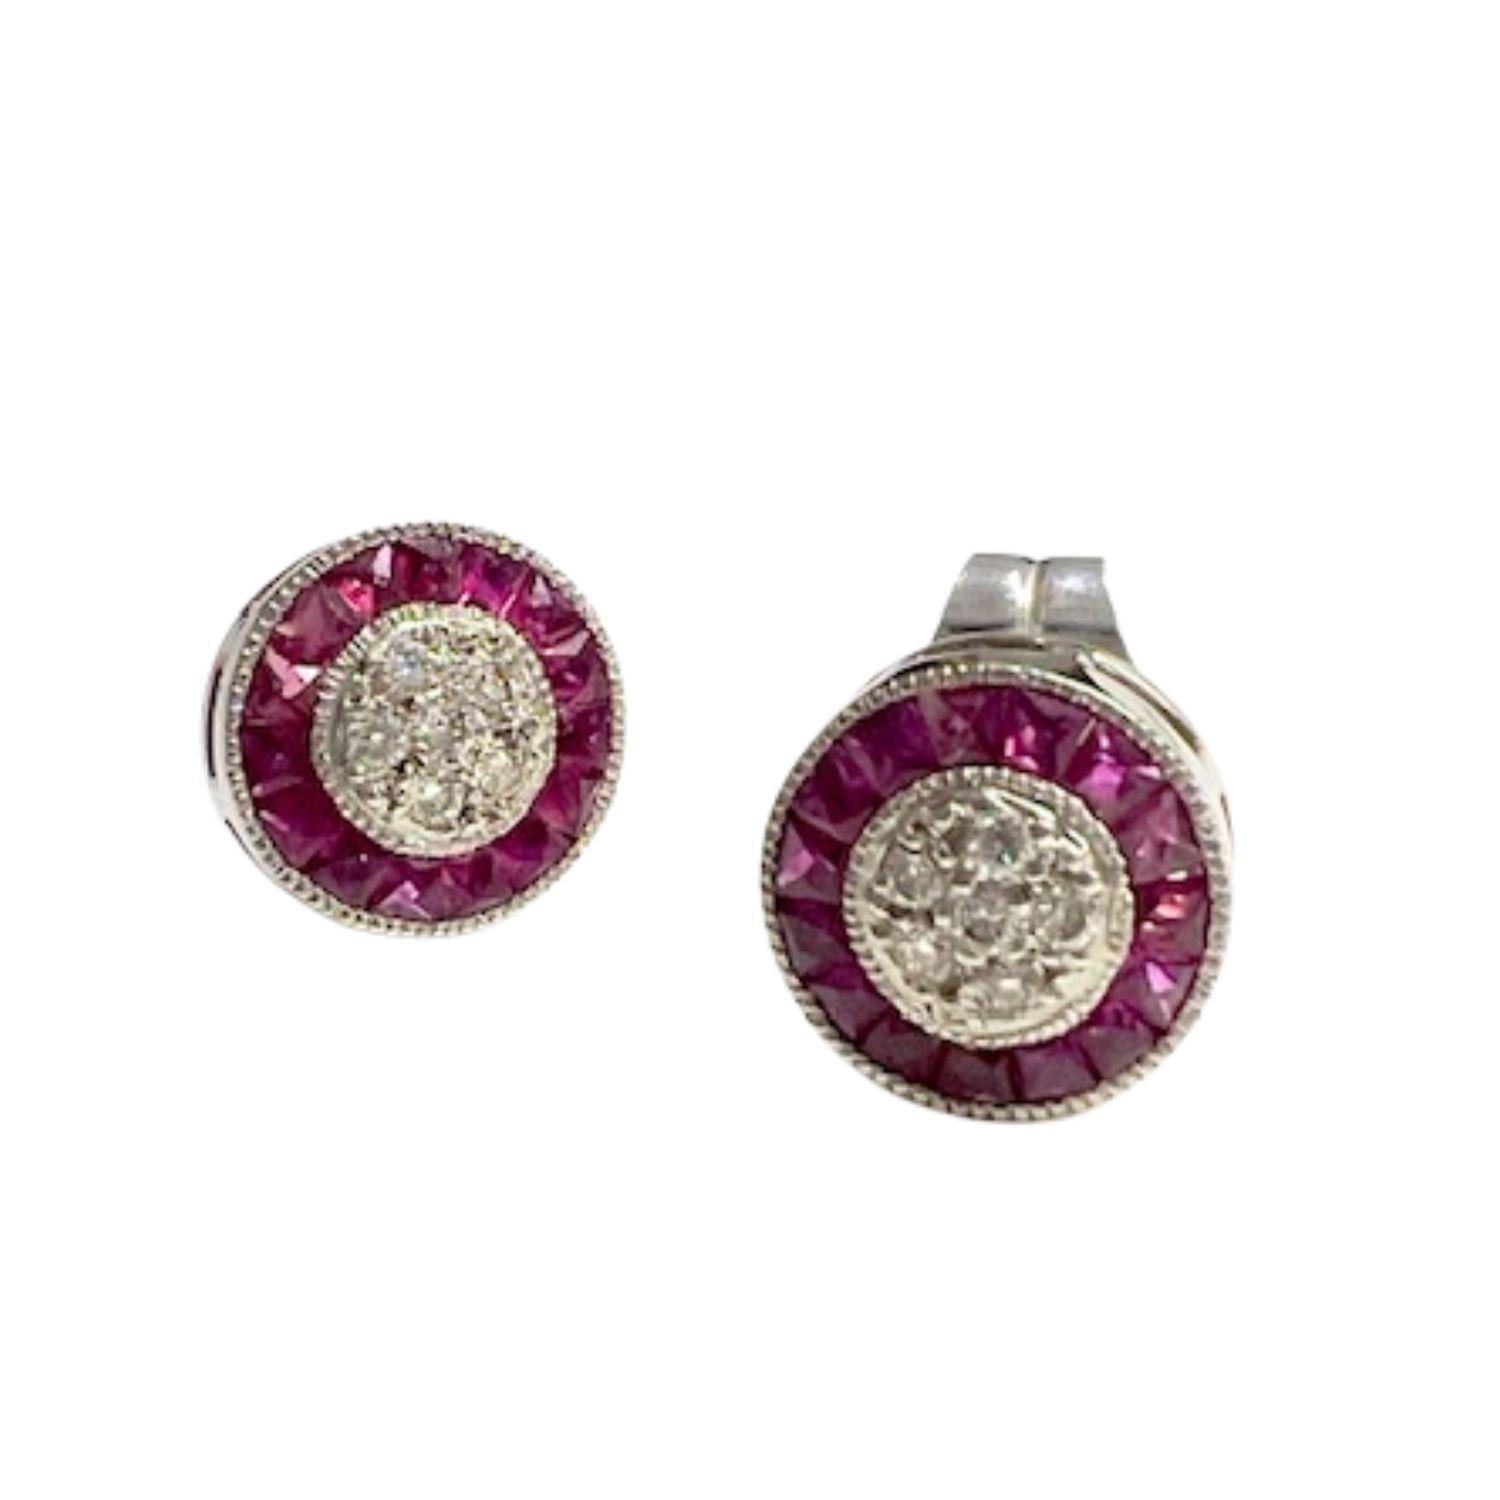 Add a touch of Art Deco elegance with these stunning ruby and diamond stud earrings crafted in white gold 18 kts. With a weight of 4.95 grams and measuring 0.8 x 0.3 cm, these earrings exude sophistication and glamour. 
The brilliant-cut diamonds